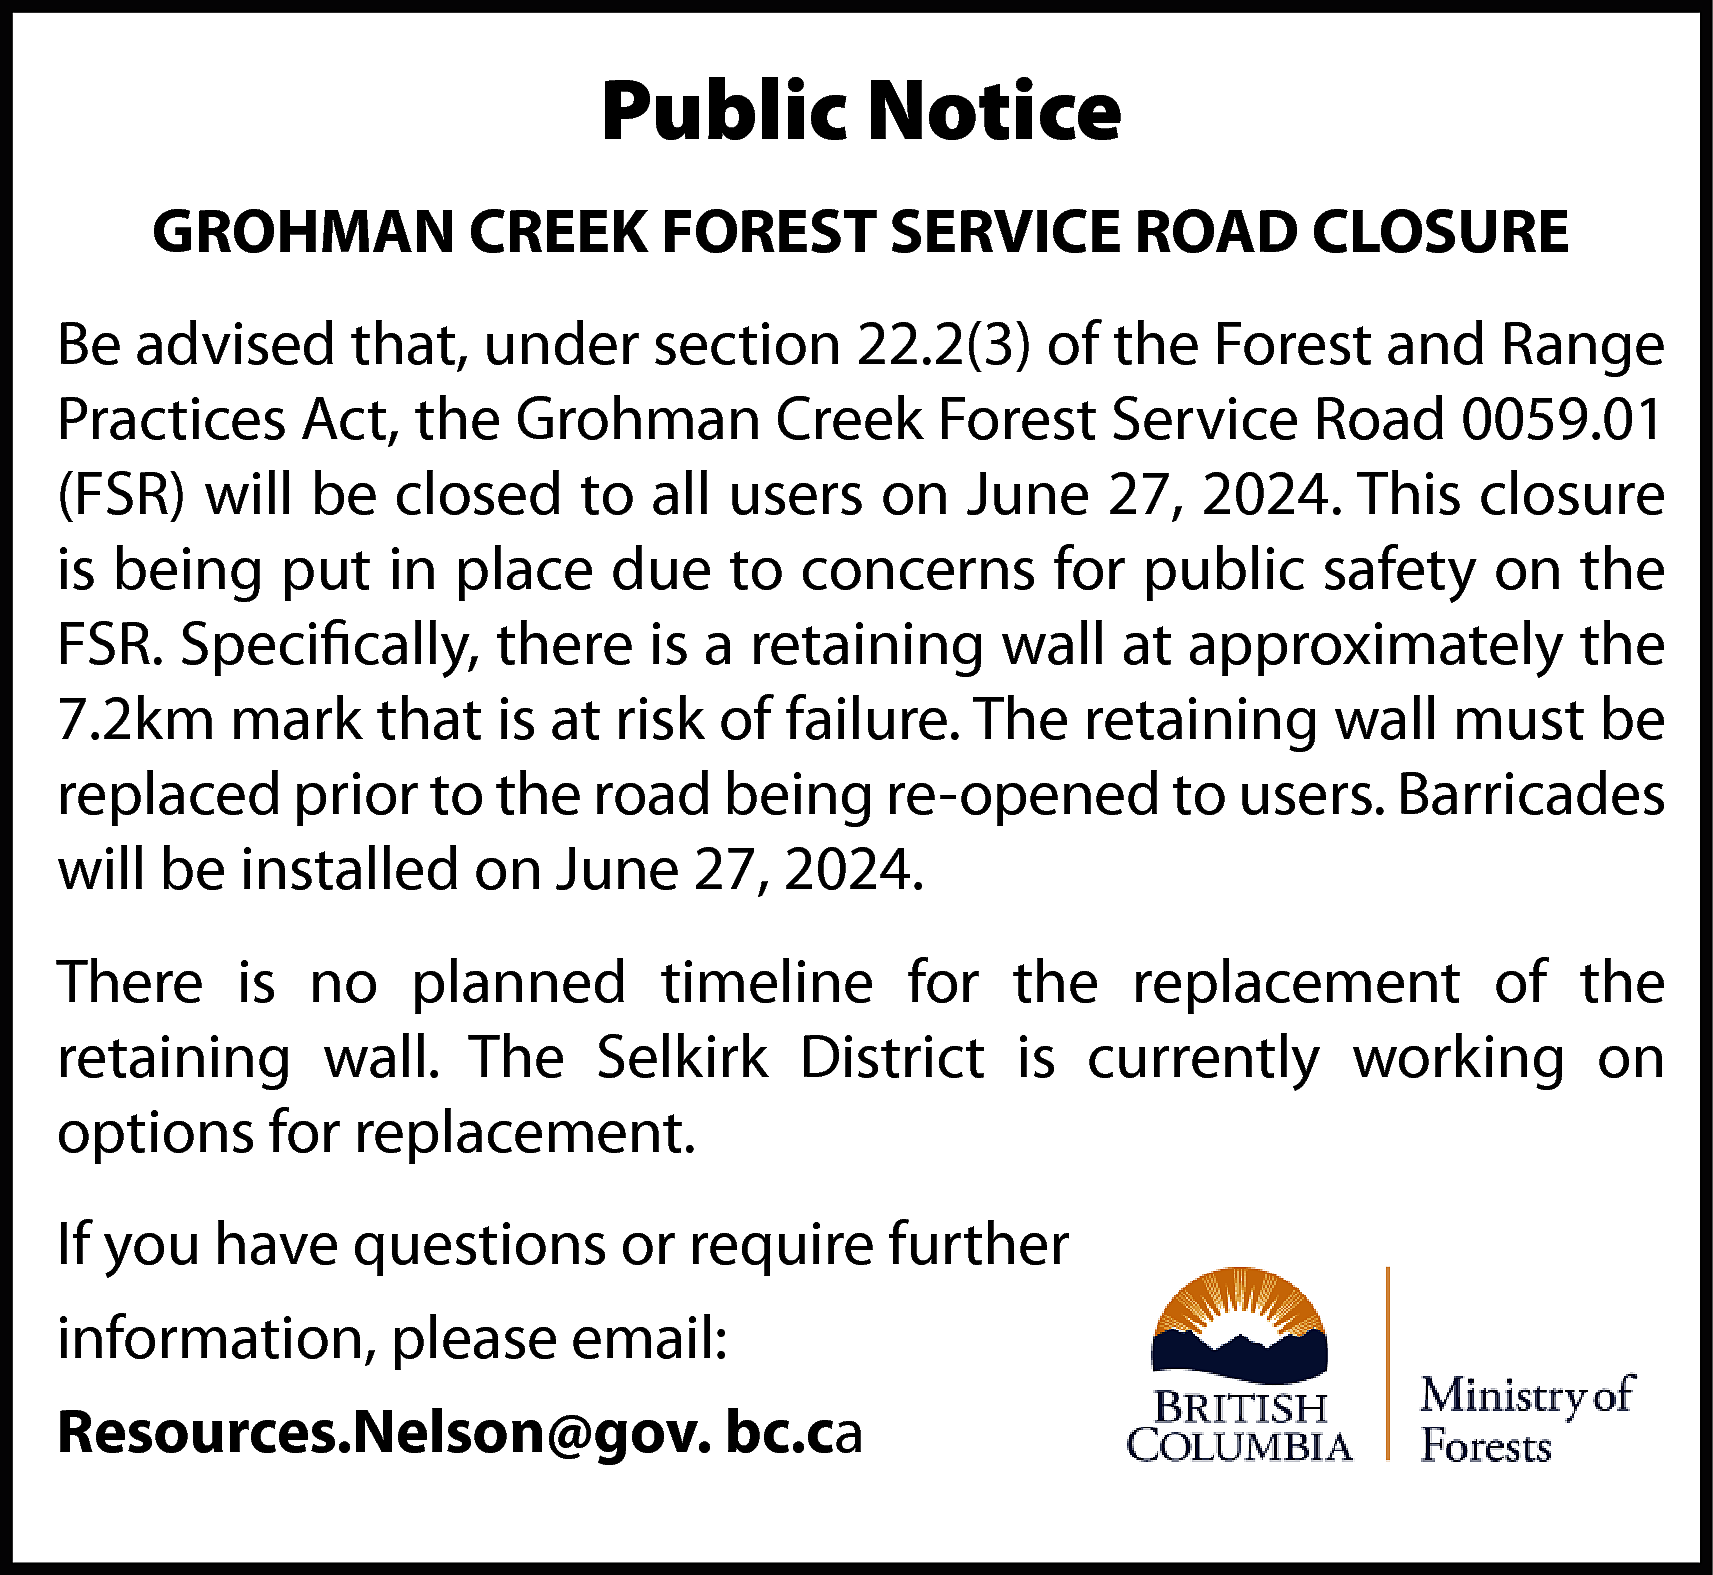 Public Notice <br>GROHMAN CREEK FOREST  Public Notice  GROHMAN CREEK FOREST SERVICE ROAD CLOSURE  Be advised that, under section 22.2(3) of the Forest and Range  Practices Act, the Grohman Creek Forest Service Road 0059.01  (FSR) will be closed to all users on June 27, 2024. This closure  is being put in place due to concerns for public safety on the  FSR. Specifically, there is a retaining wall at approximately the  7.2km mark that is at risk of failure. The retaining wall must be  replaced prior to the road being re-opened to users. Barricades  will be installed on June 27, 2024.  There is no planned timeline for the replacement of the  retaining wall. The Selkirk District is currently working on  options for replacement.  If you have questions or require further  information, please email:  Resources.Nelson@gov. bc.ca    